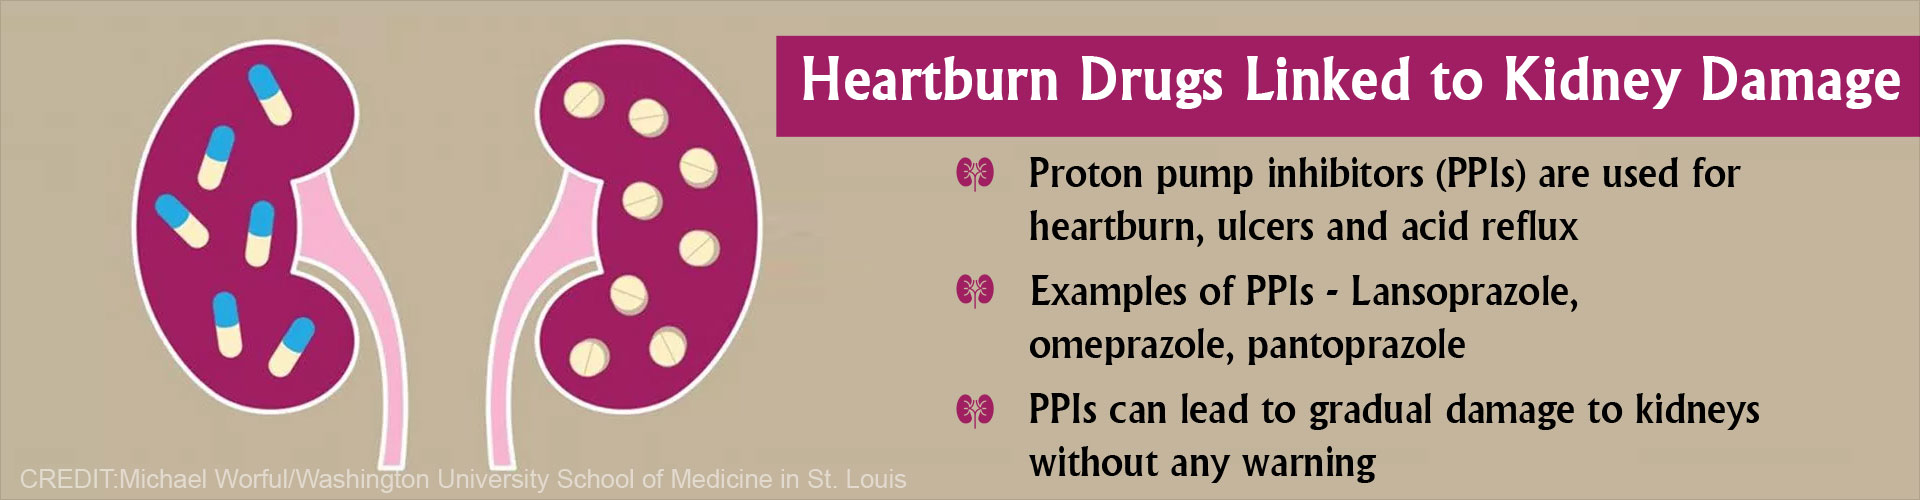 Heartburn drugs linked to kidney damage
- Proton pump inhibitors (PPIs) are used for heartburn, ulcers and acid reflux
- Examples of PPIs - lansoprazole, omeprazole, pantoprazole
- PPIs can lead to gradual damage to without any warning
